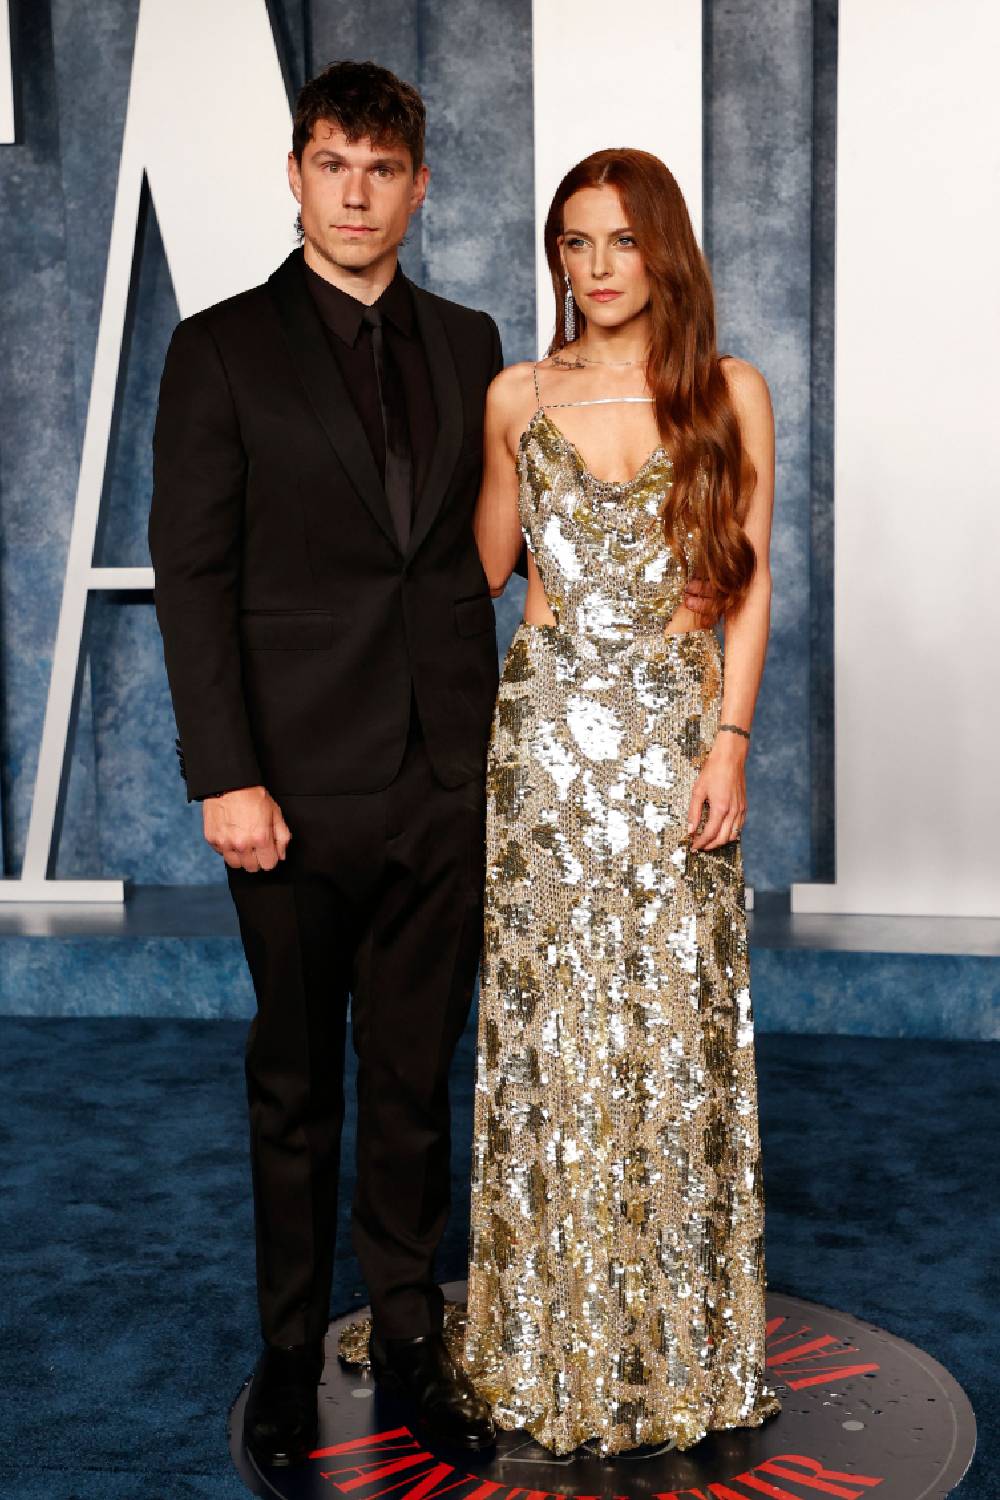 Riley Keough and her husband Ben Smith-Petersen attend the Vanity Fair 95th Oscars Party.